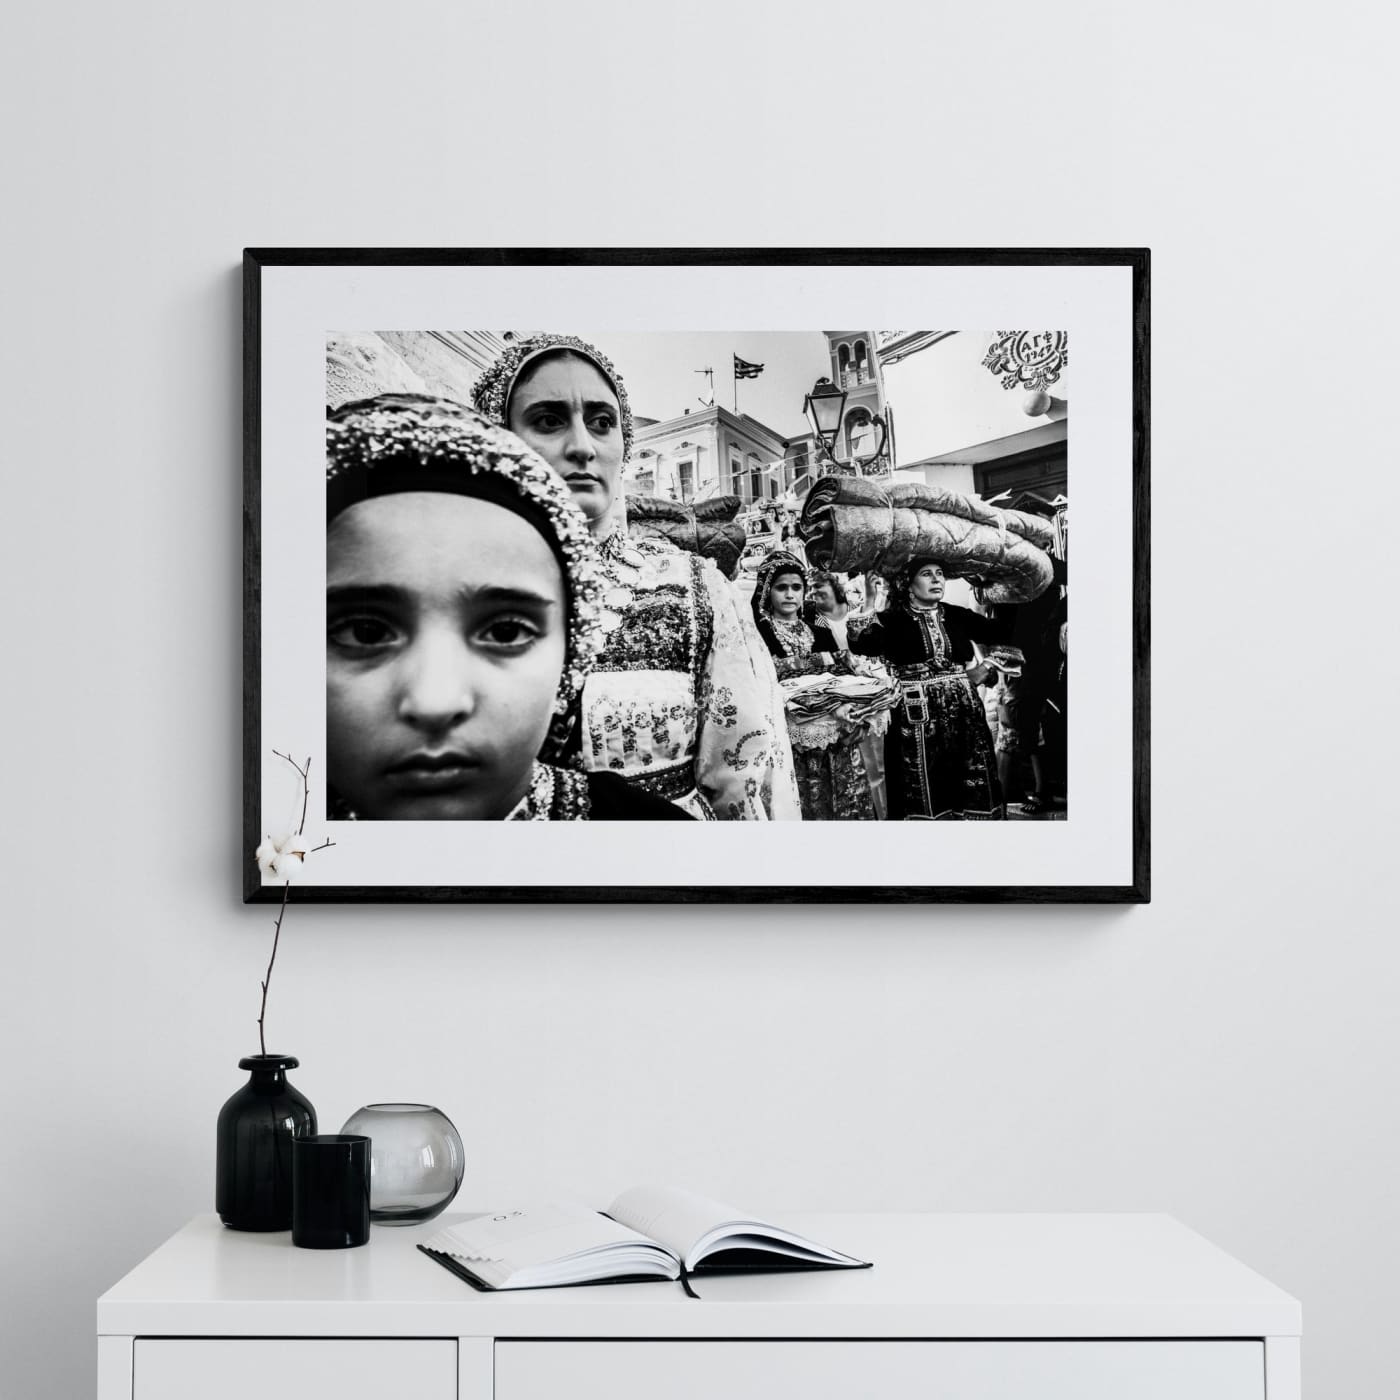 Black and White Photography Wall Art Greece | Dowry in the central square of Olympos Karpathos Dodecanese by George Tatakis - single framed photo